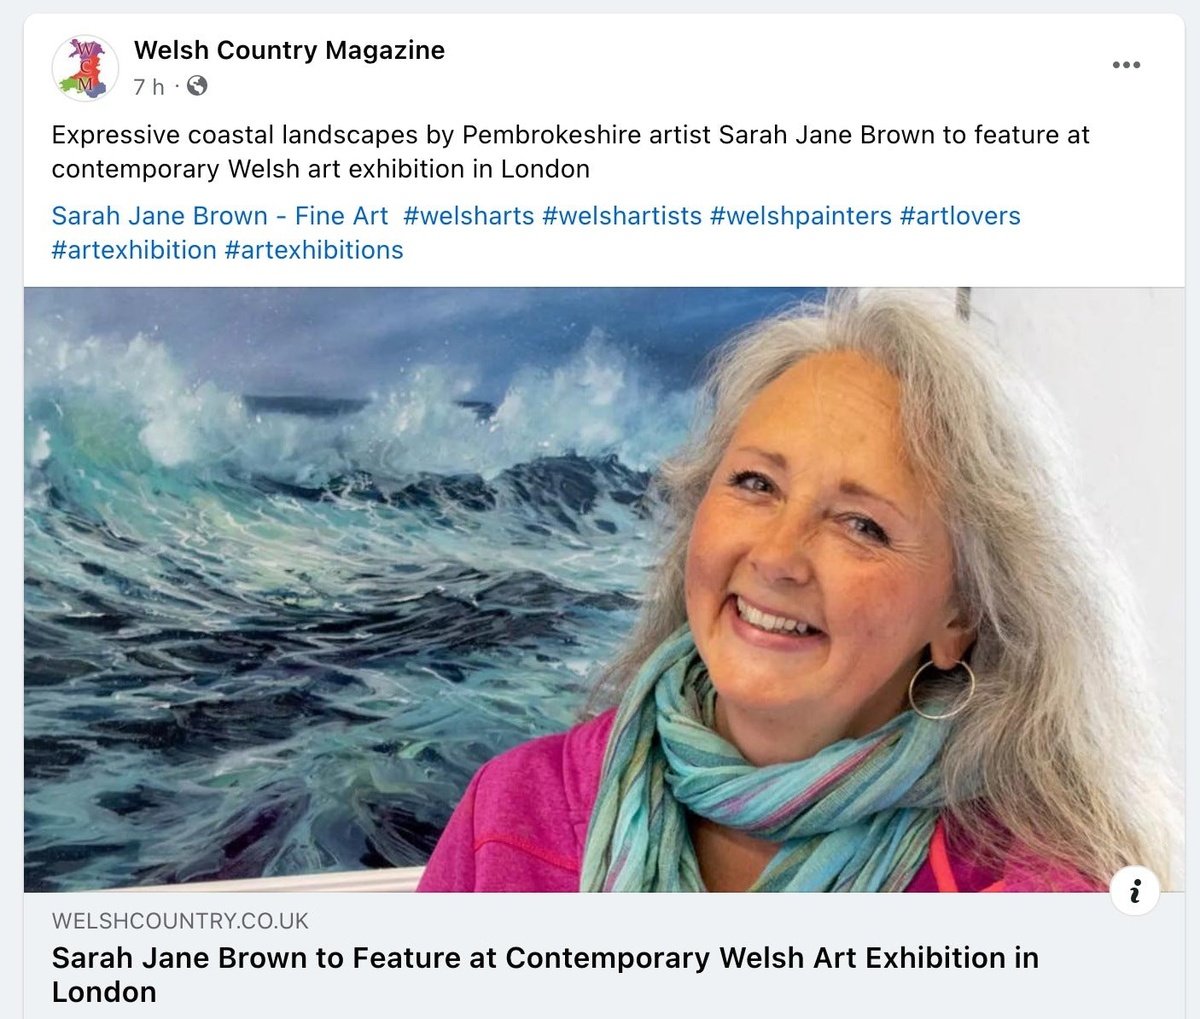 Sarah Jane Brown to feature at Contemporary Welsh Art Exhibition in London